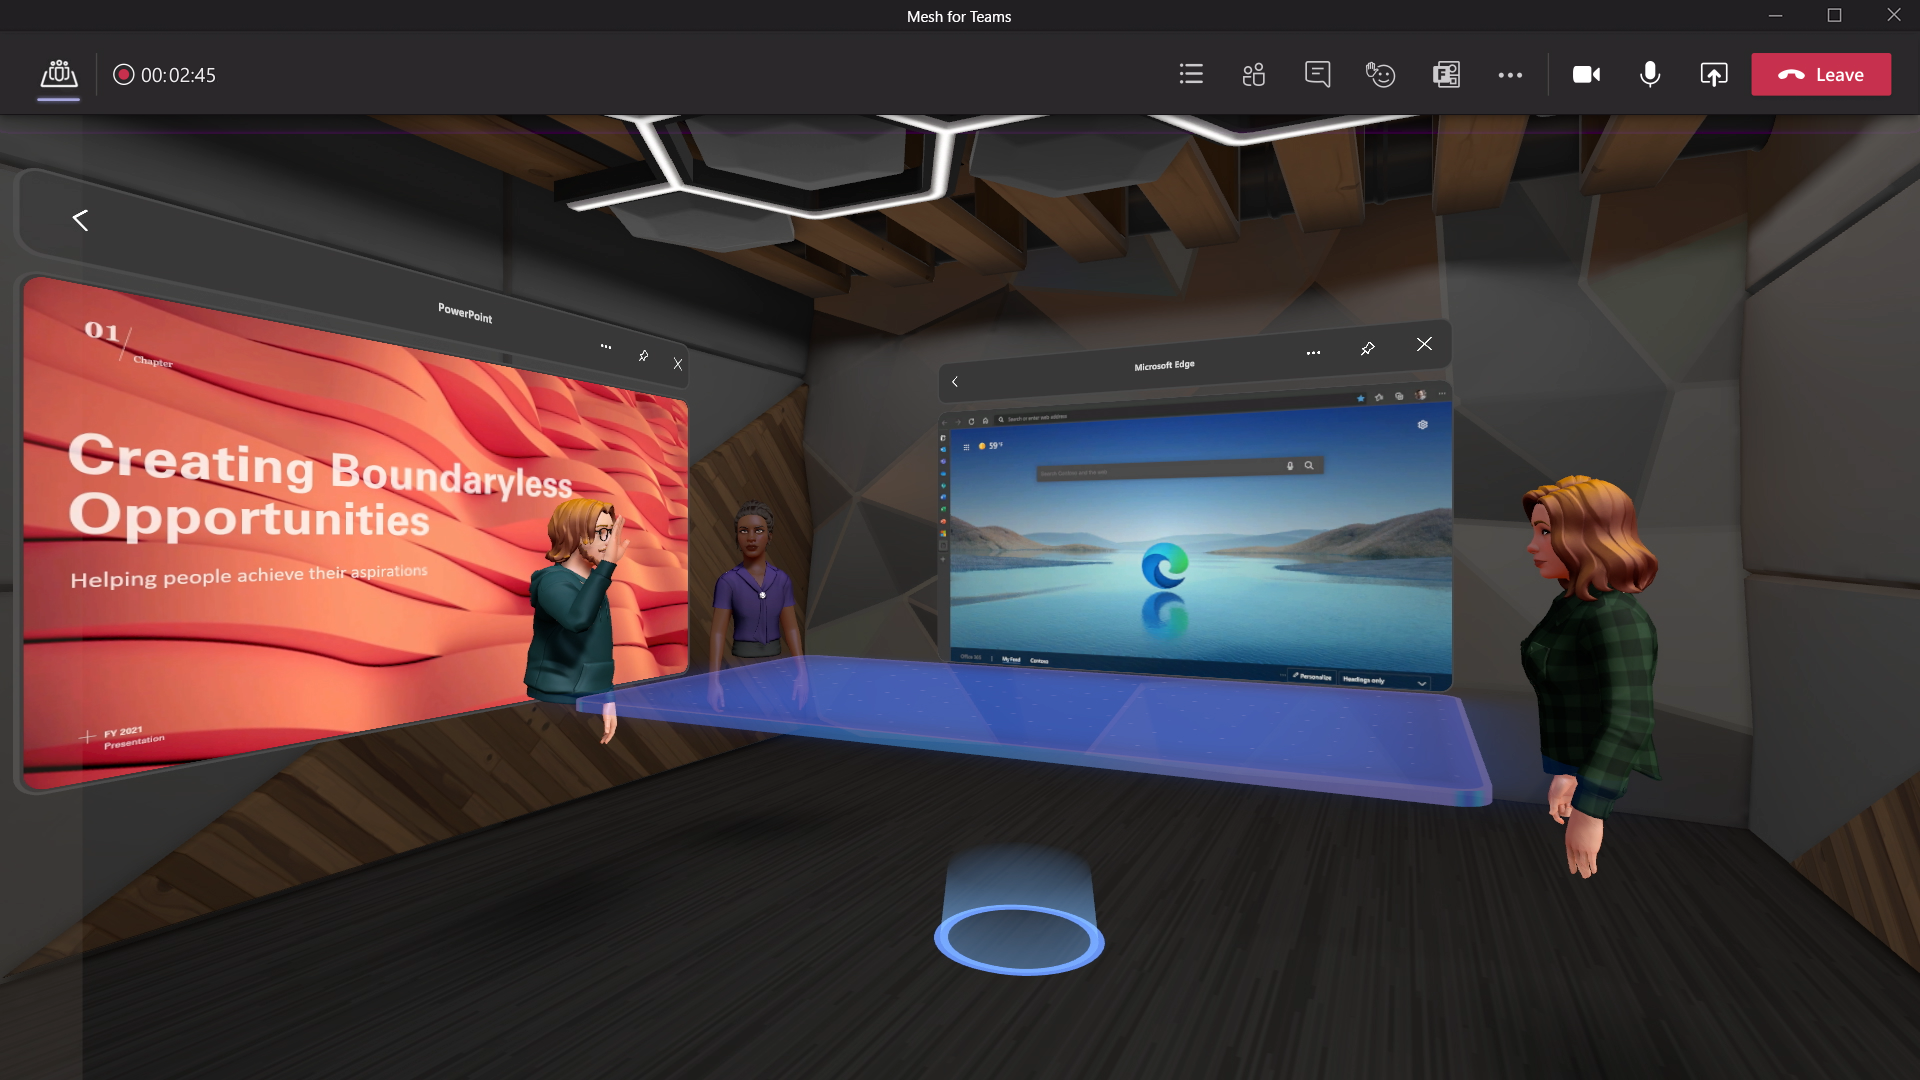 Here's an idea of what a custom virtual meeting room might look like in Teams on Mesh.  (Image: Microsoft)